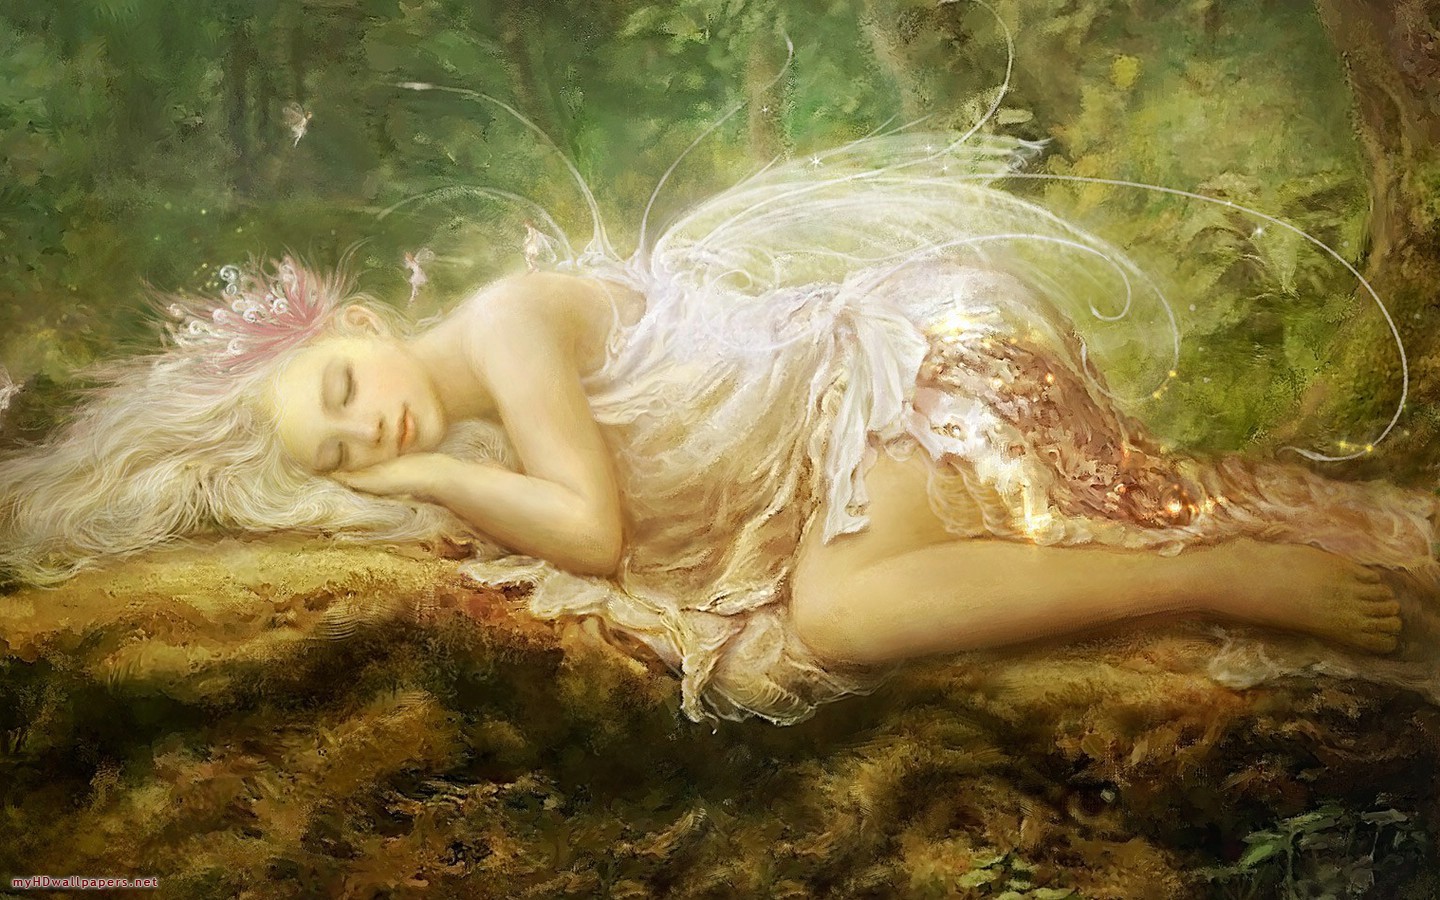 My HD Wallpapers Blog Archive Painting fairy My HD Wallpapers